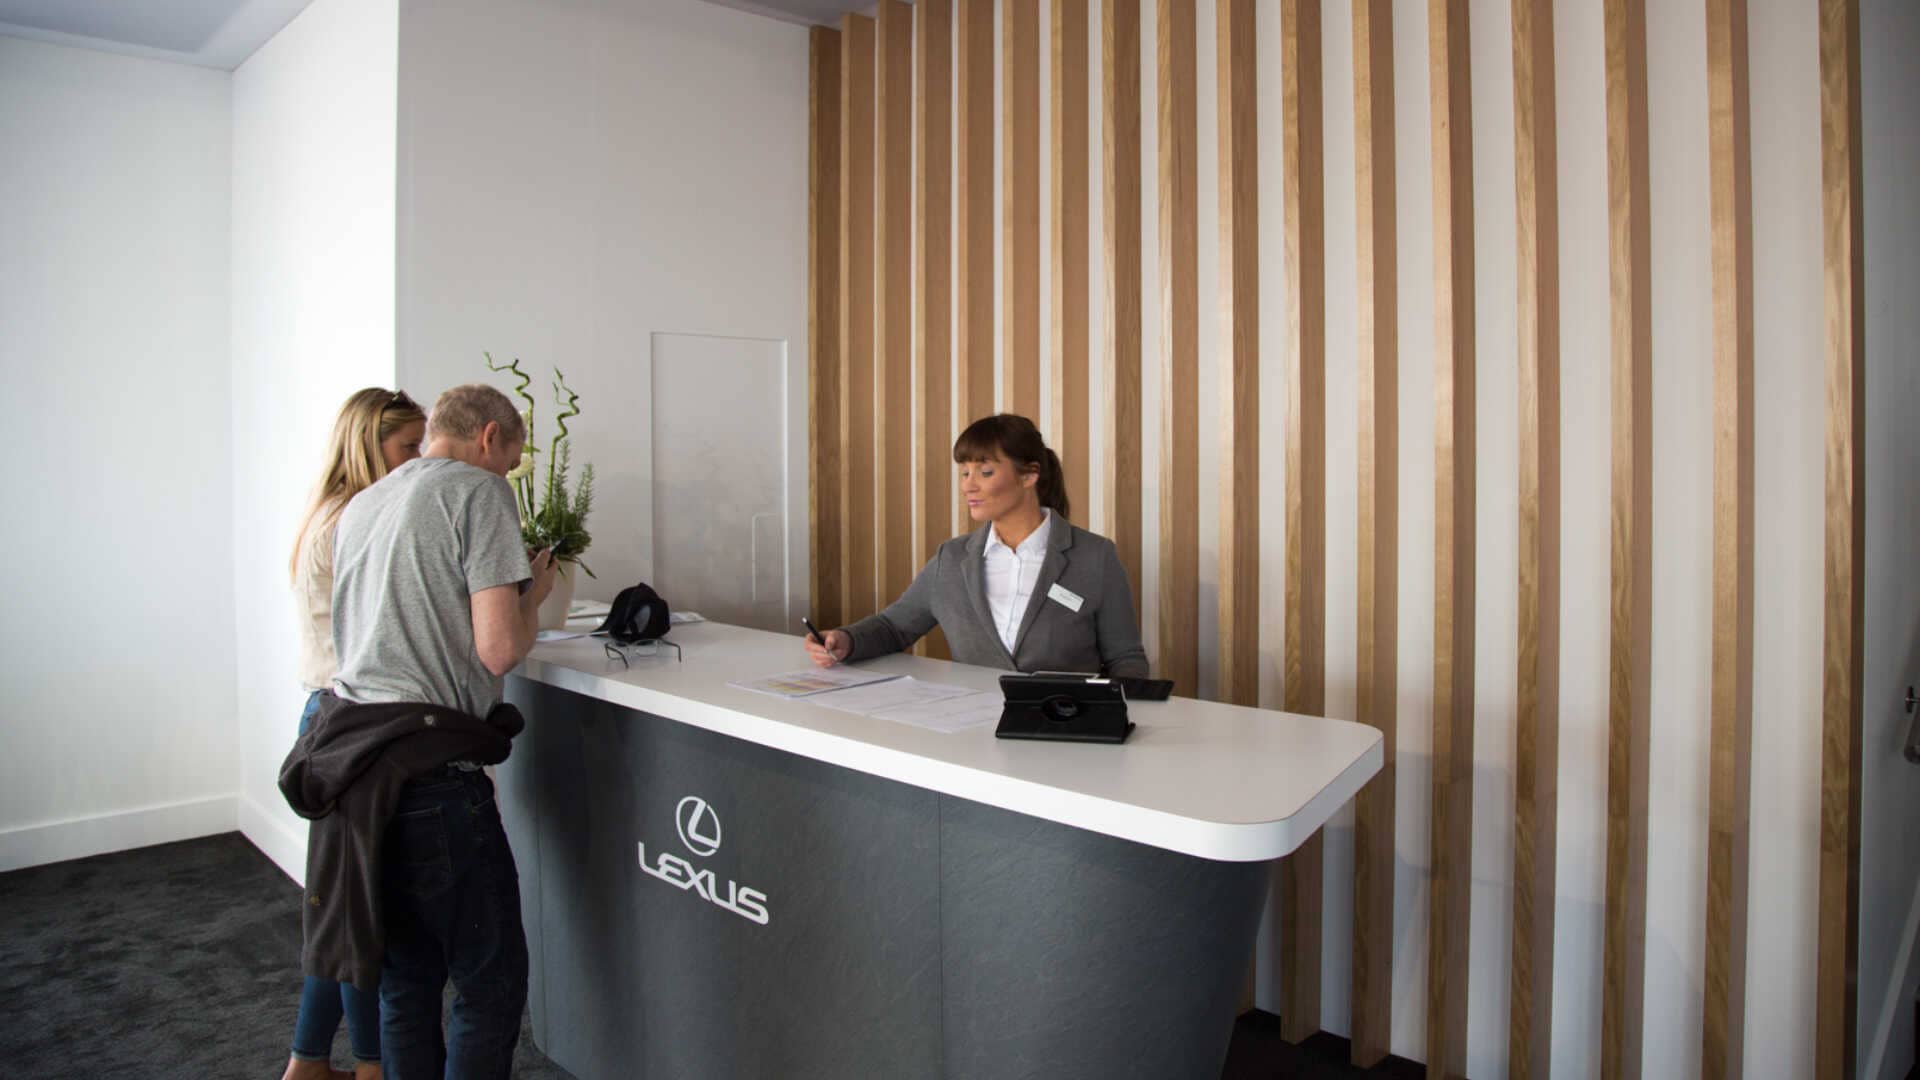 lexus representative at the front desk accommodating visitor